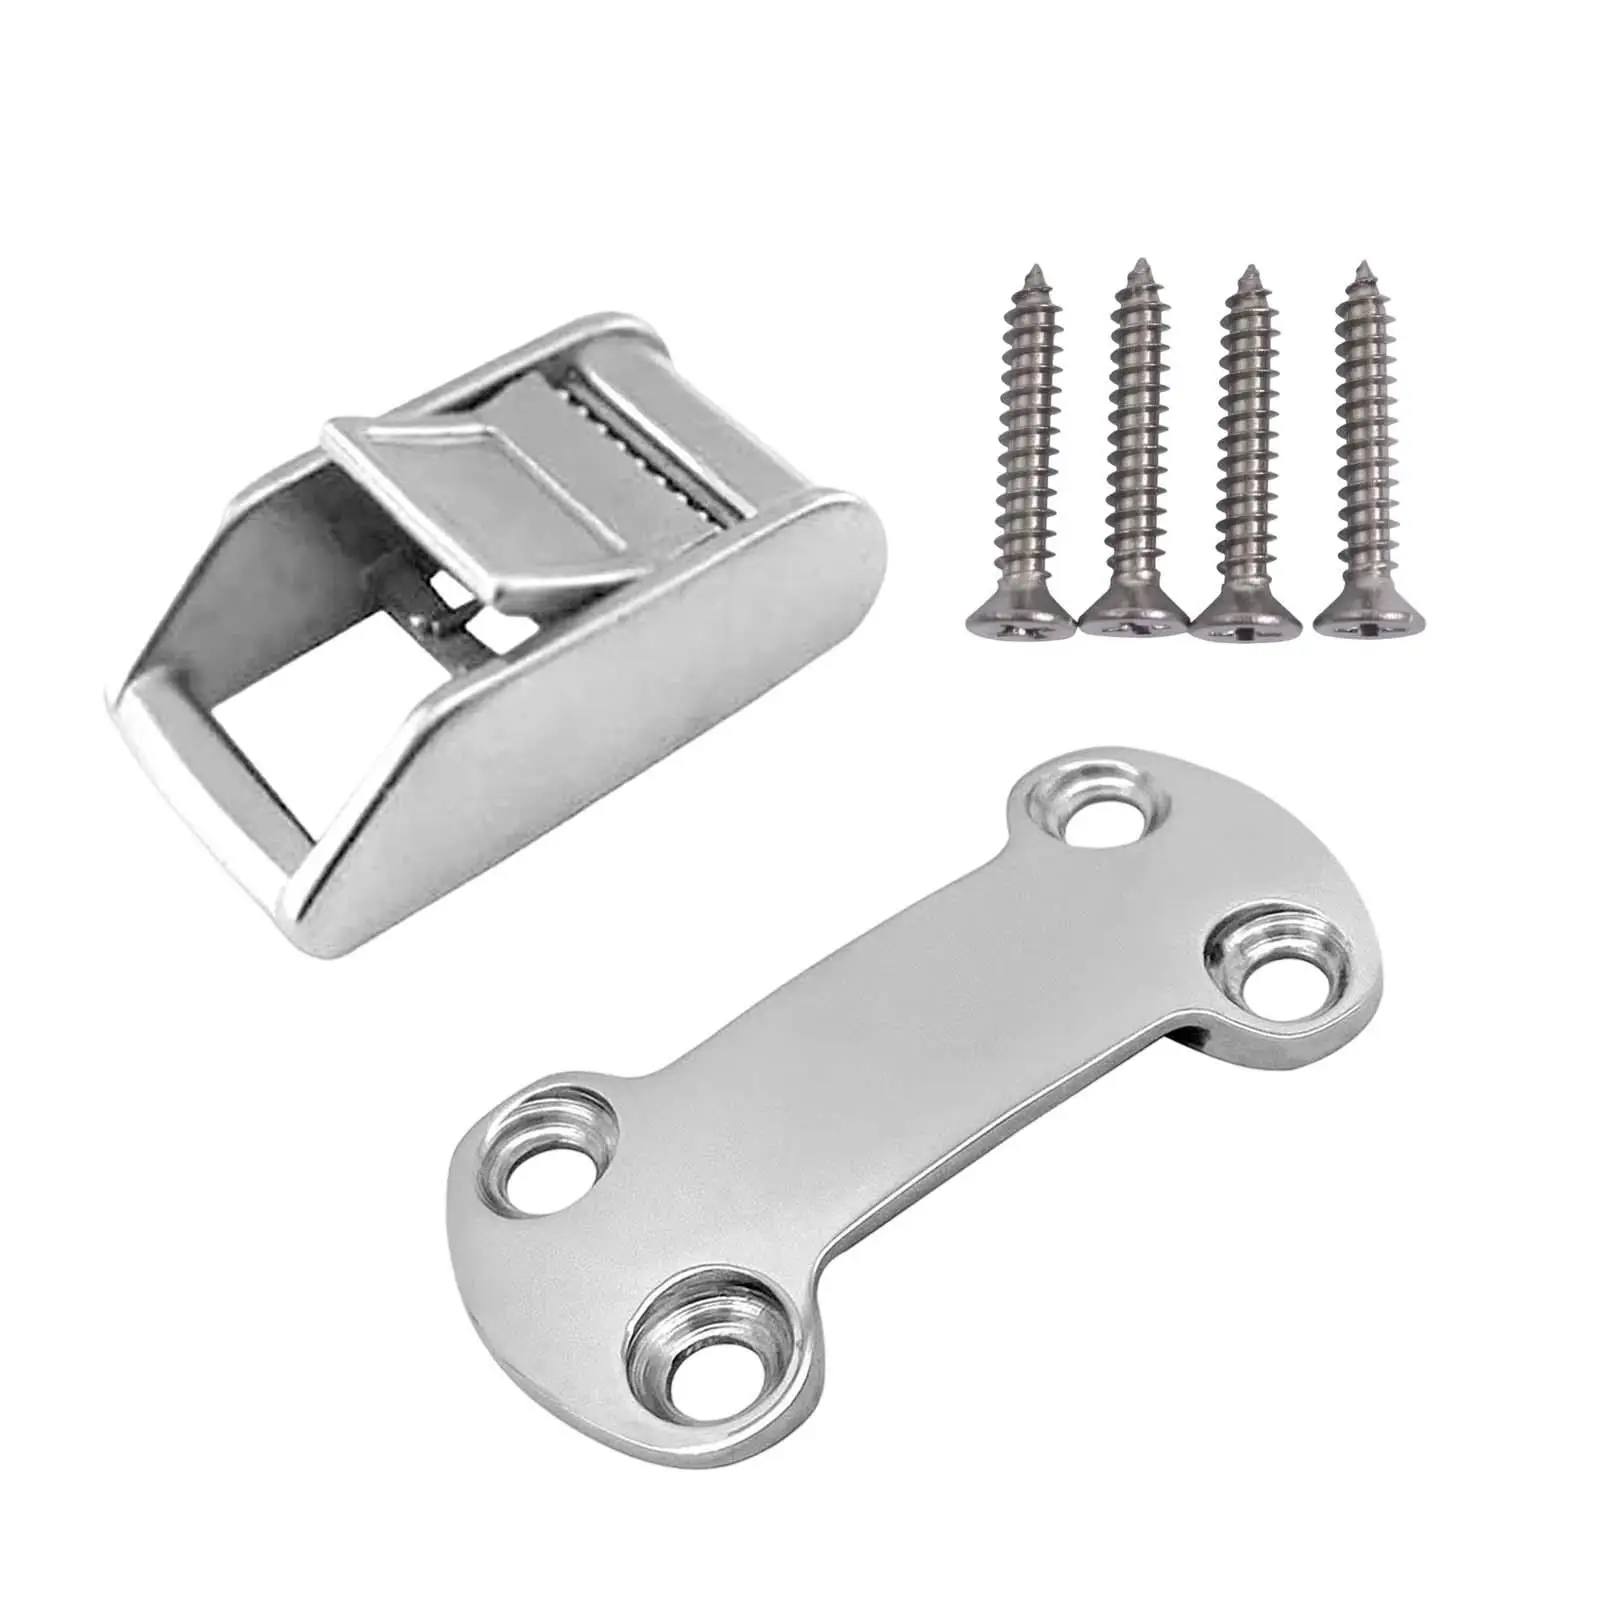 Stainless Steel Ratchet Buckle with Screws Hardware for Canoes Kayaks Travel